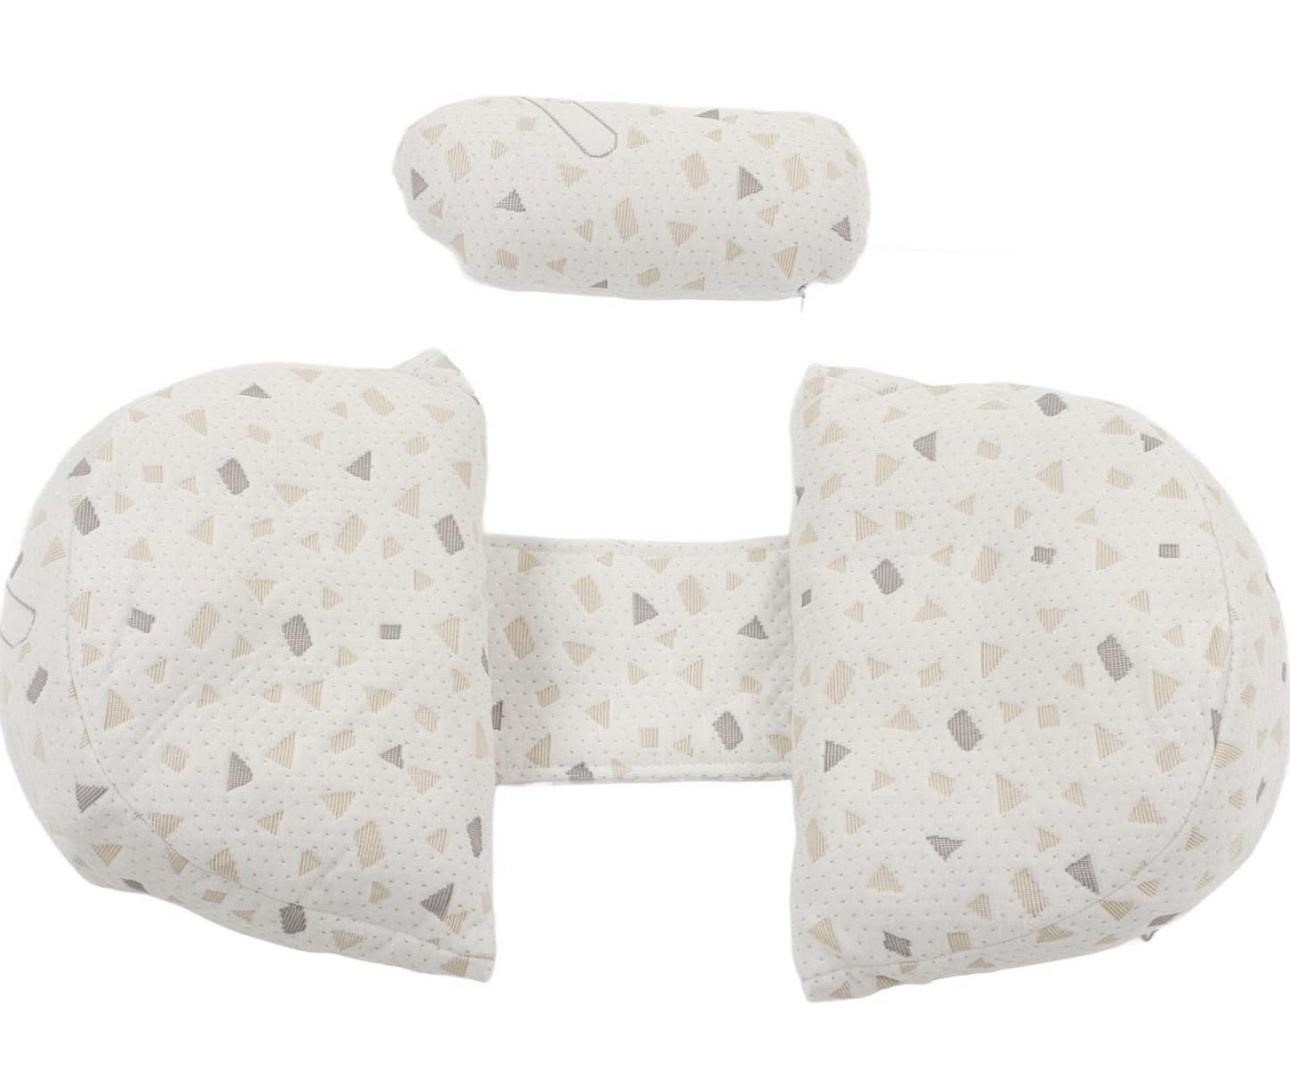 Adjustable Support Maternity Pillow